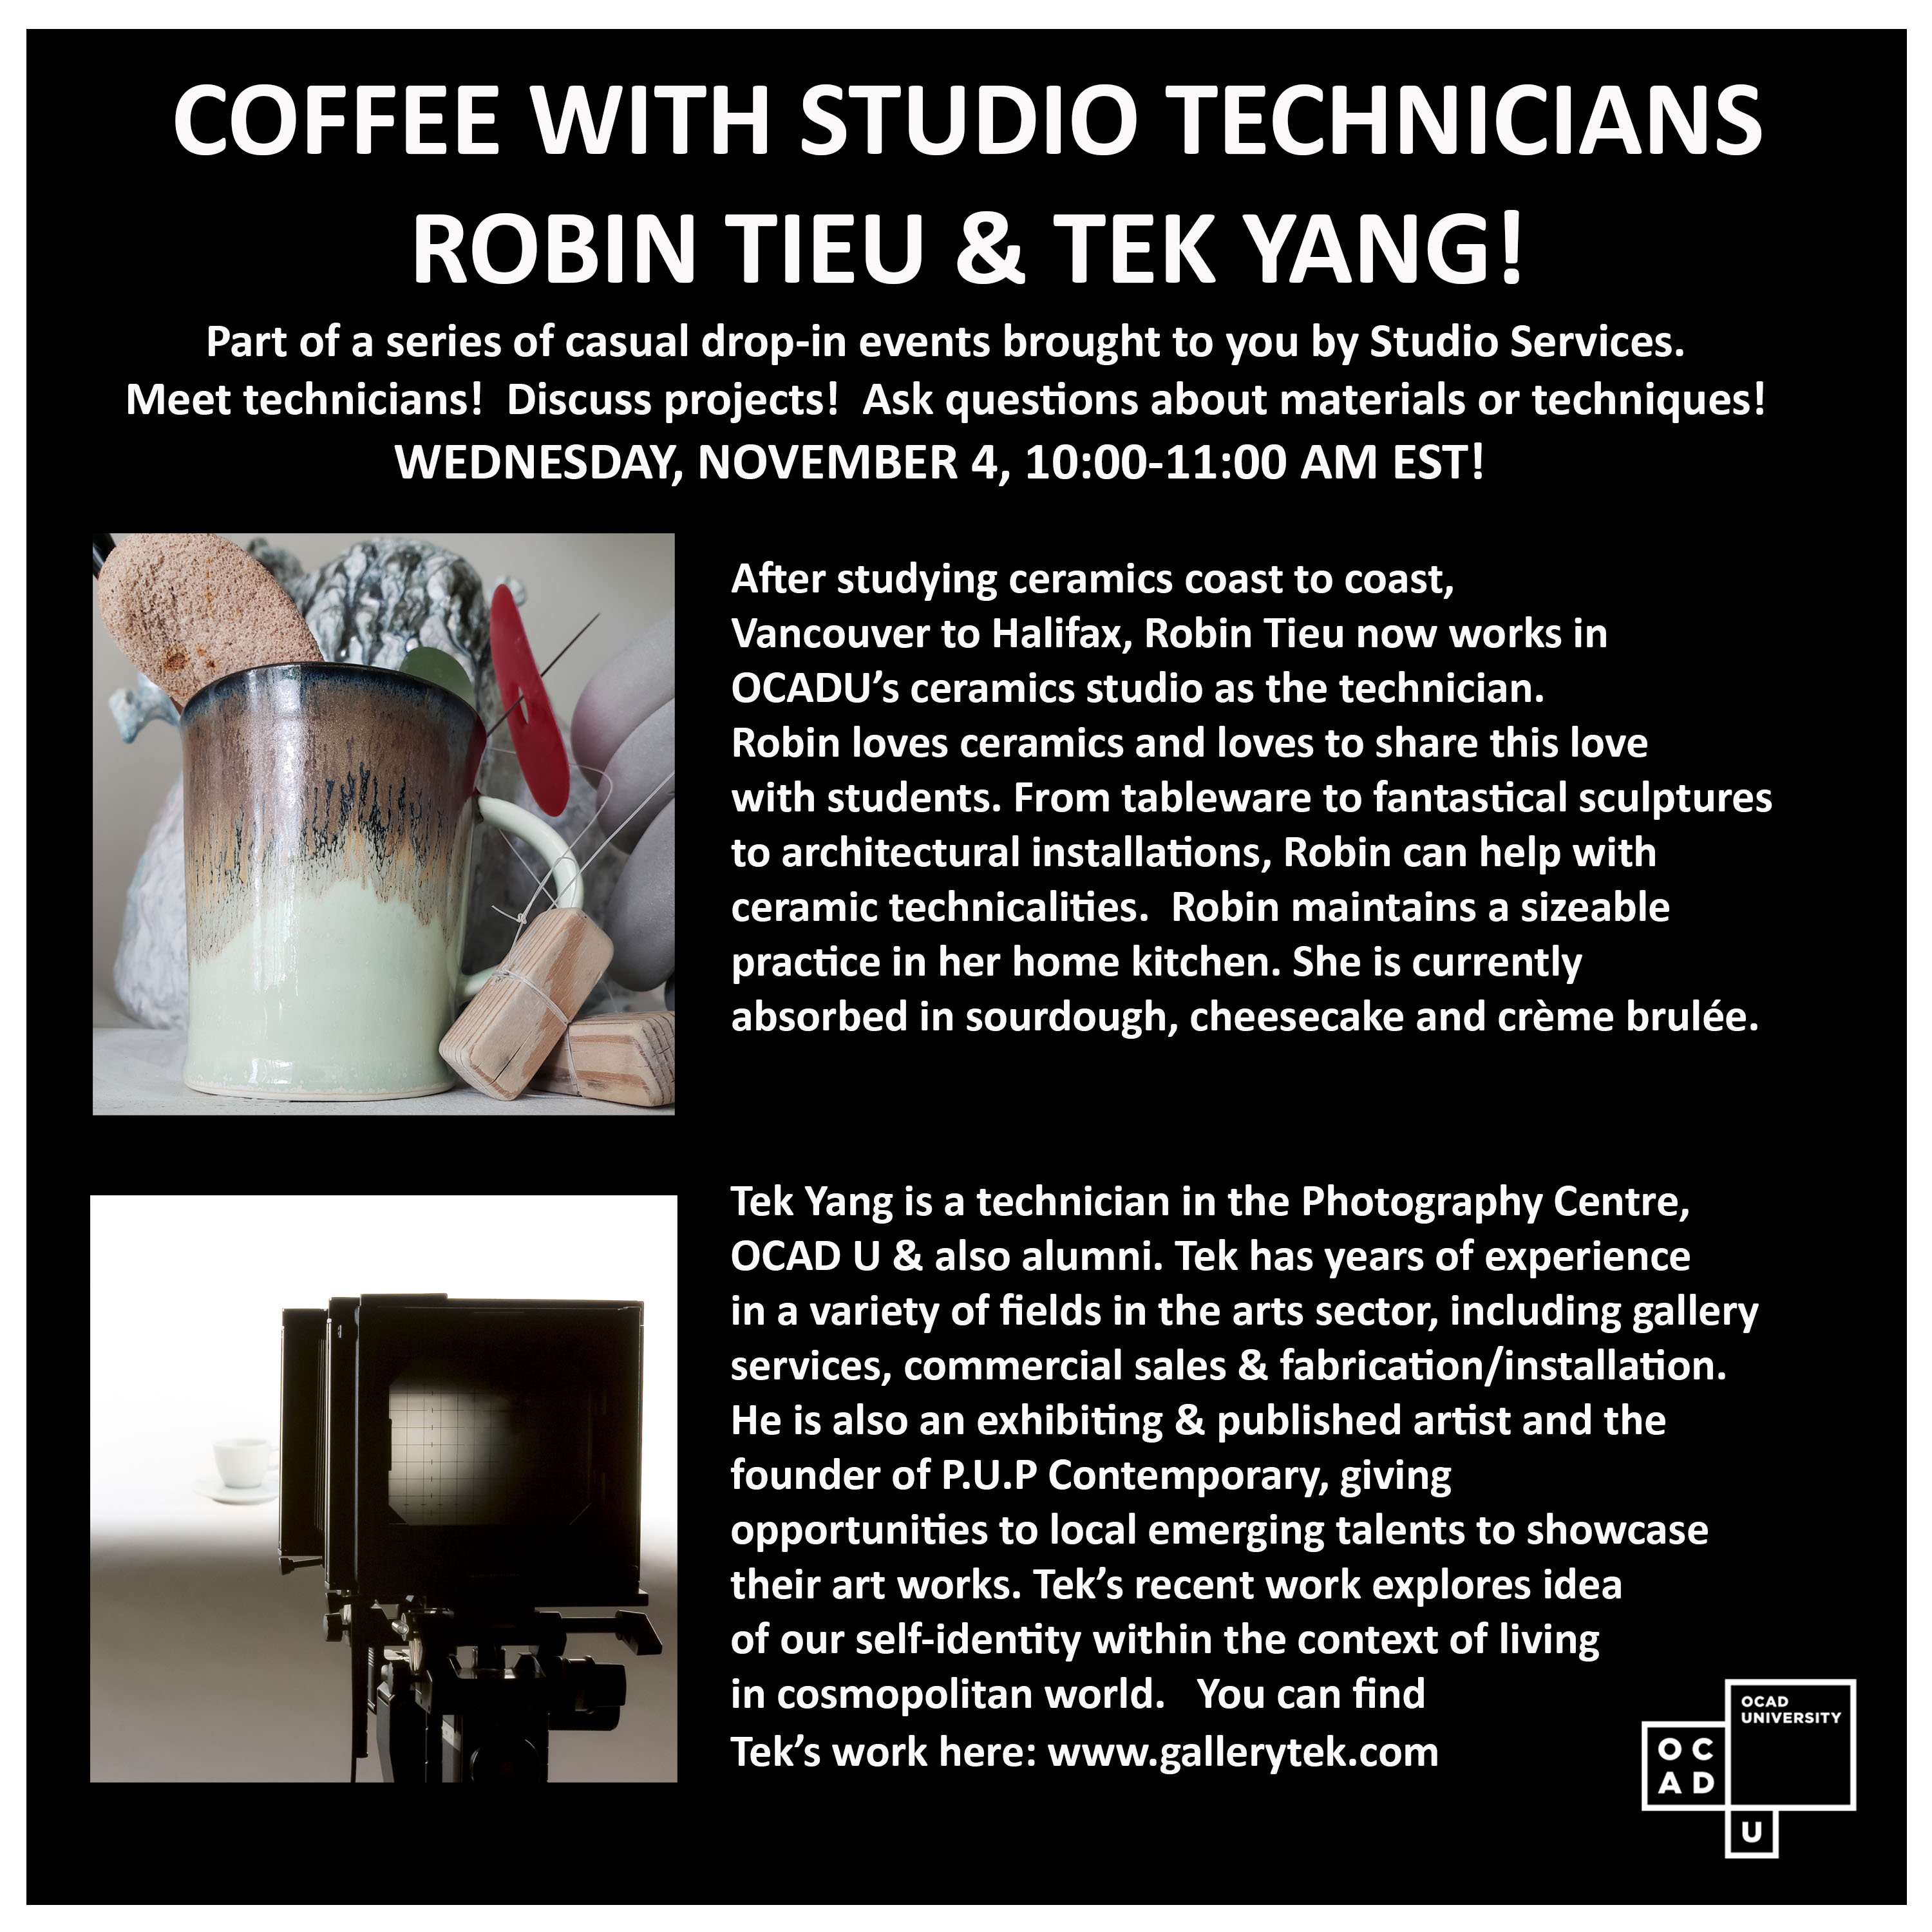 poster for coffee with studio technicians with images of coffee mugs in workspaces